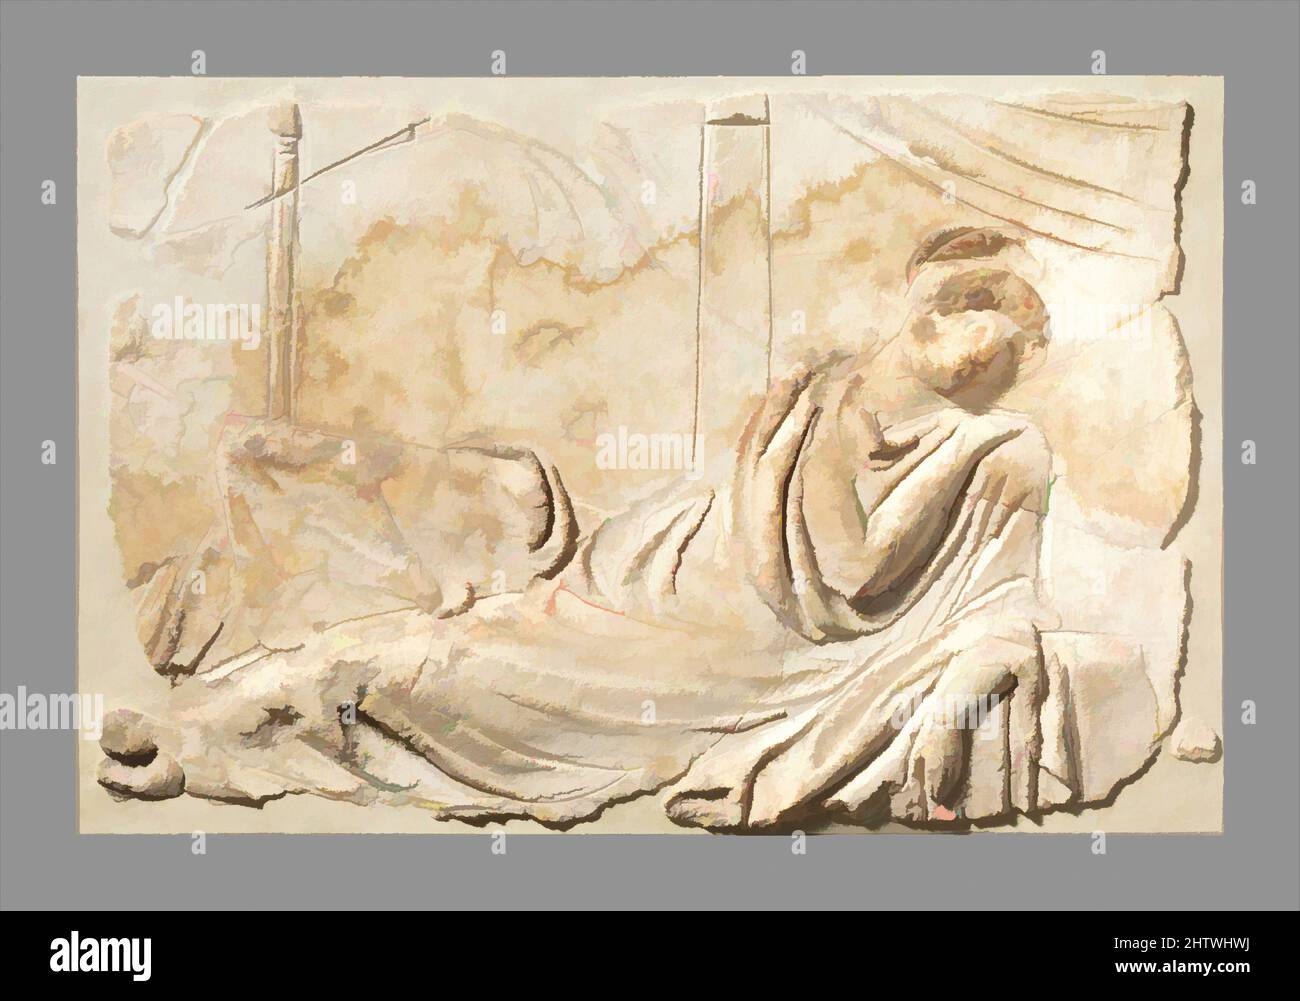 Art inspired by Stucco relief panel, Early Imperial, 2nd half of 1st century A.D., Roman, Stucco, Overall: 9 1/2 x 14 3/8 x 2 1/4 in. (24.1 x 36.5 x 5.7 cm), Miscellaneous-Stucco, Draped in a heavy cloak and with an elaborate hairdo, the woman reclines with one knee raised. Her left, Classic works modernized by Artotop with a splash of modernity. Shapes, color and value, eye-catching visual impact on art. Emotions through freedom of artworks in a contemporary way. A timeless message pursuing a wildly creative new direction. Artists turning to the digital medium and creating the Artotop NFT Stock Photo